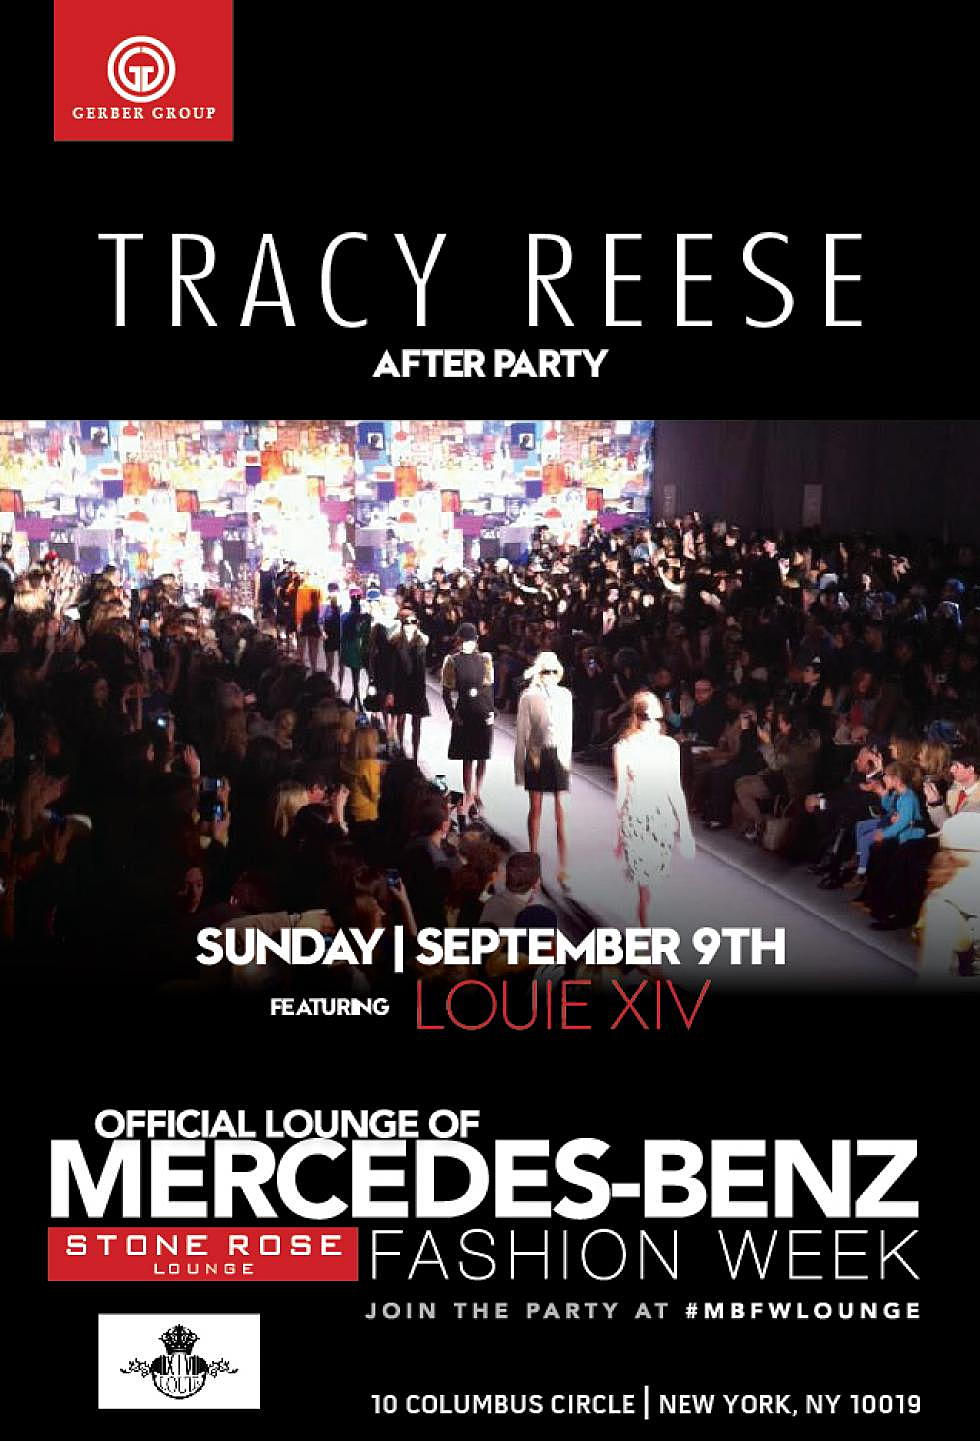 mercedes-benz fashion week at the Official Lounge Stone Rose: Tracy Reese After Party w/ Louie XIV